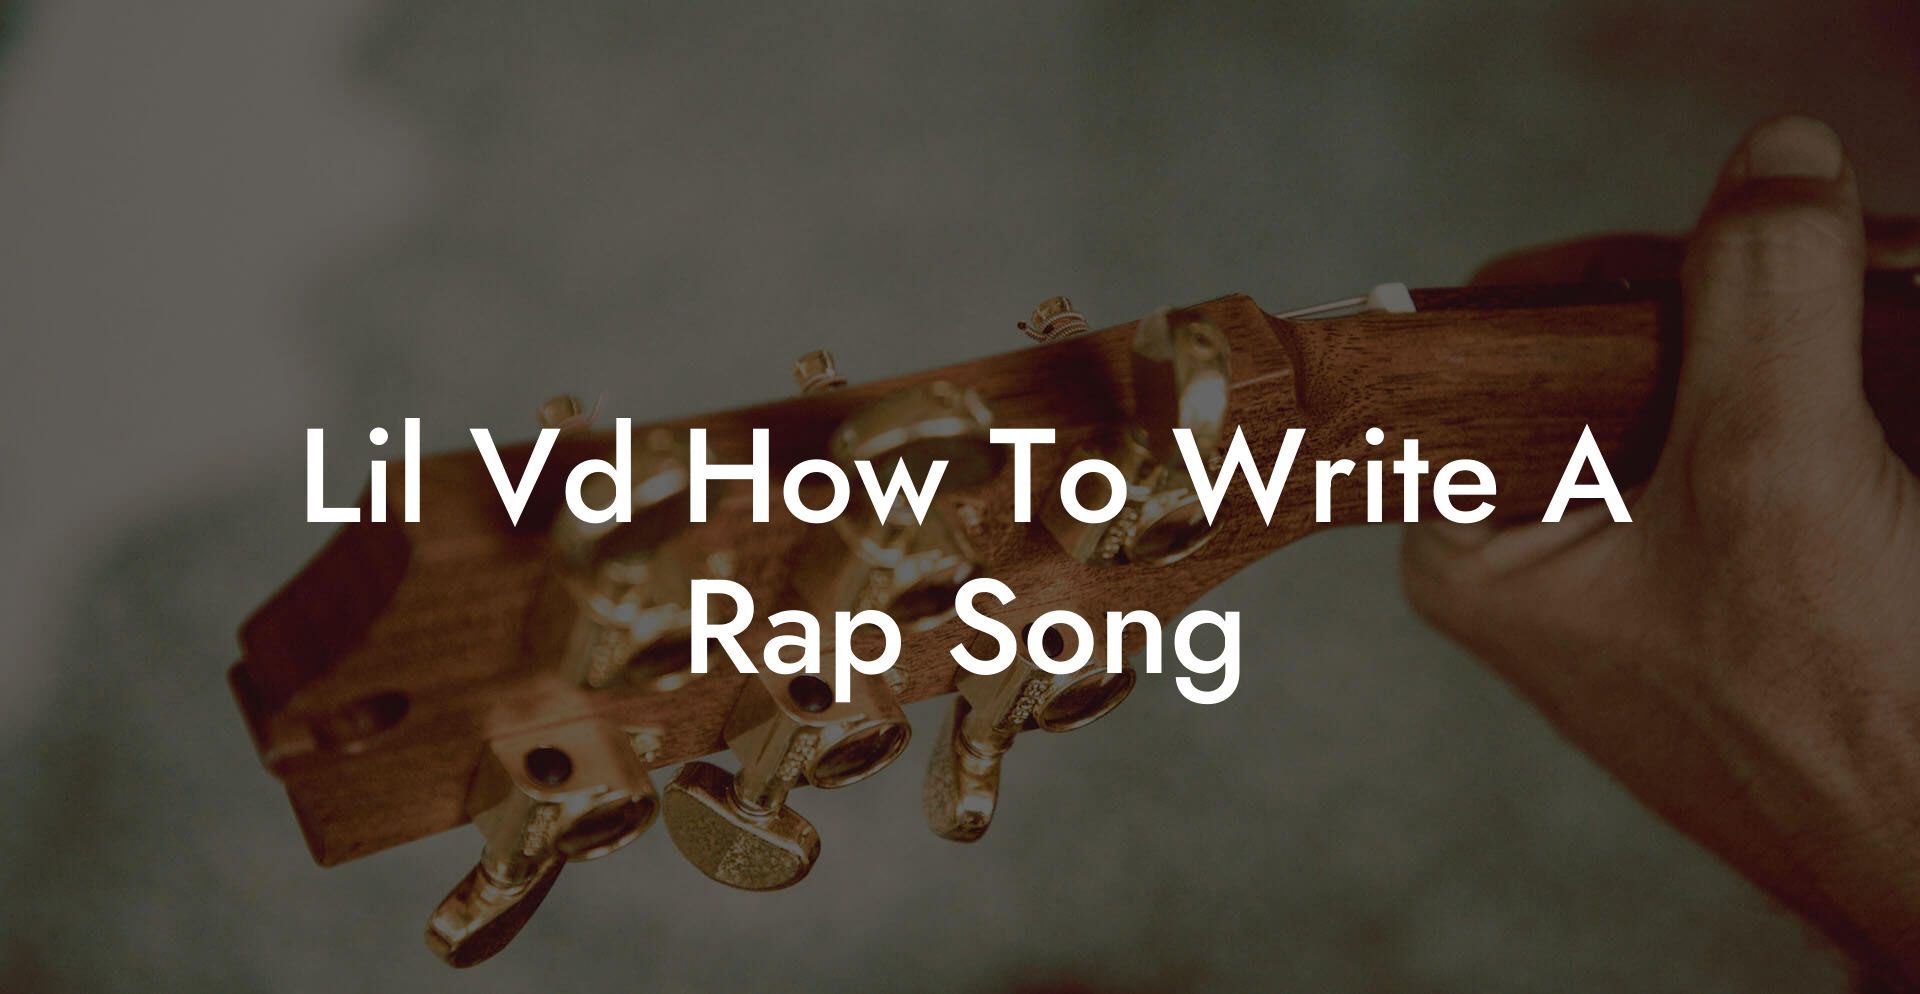 lil vd how to write a rap song lyric assistant